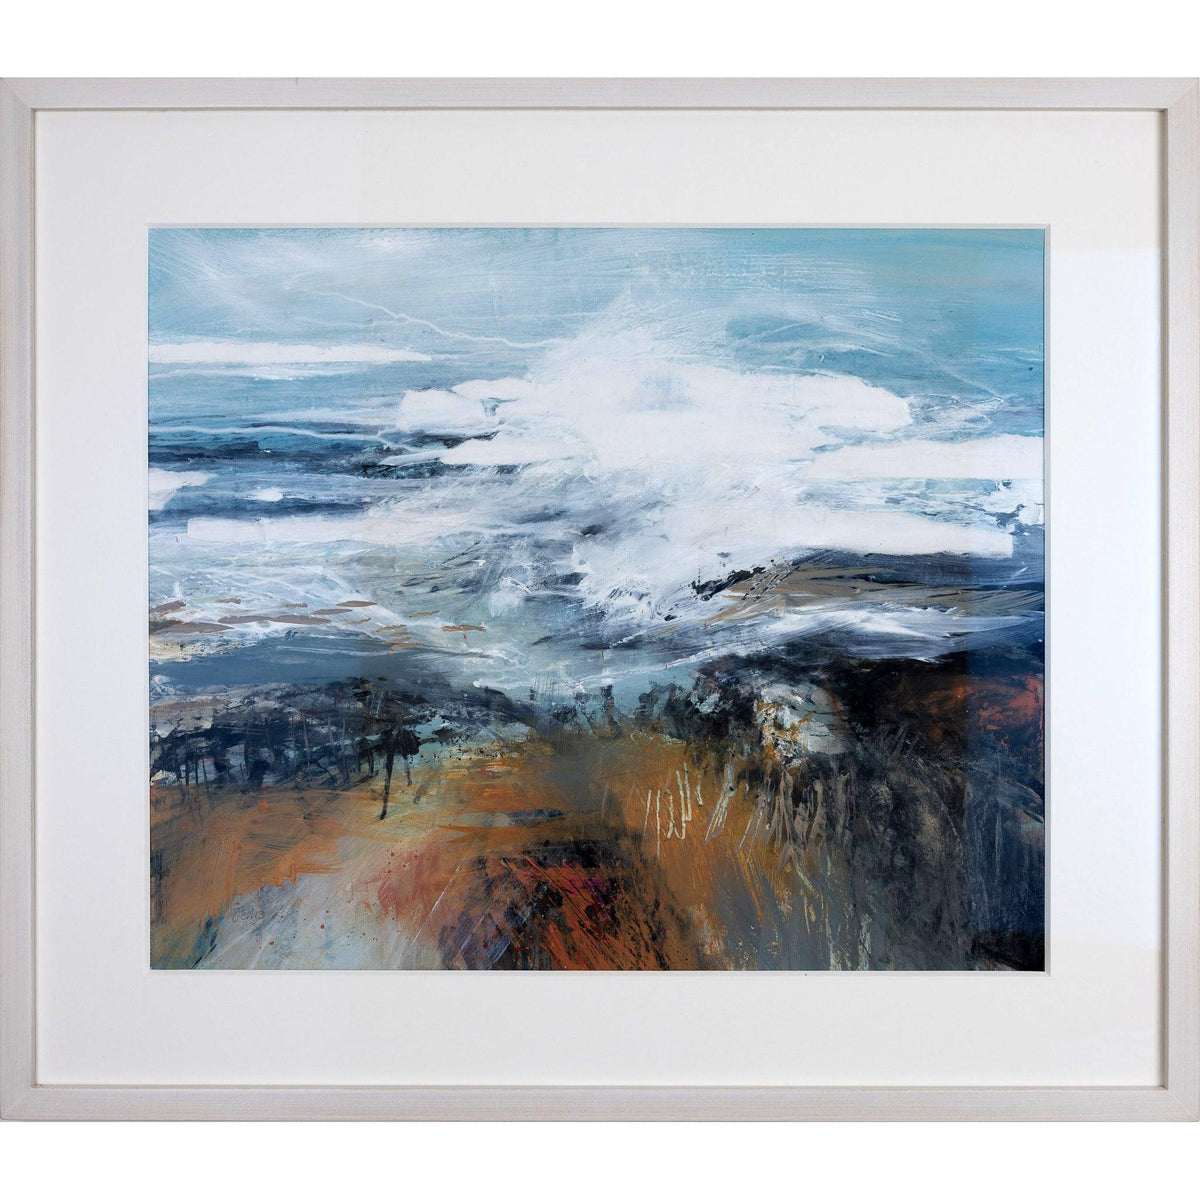 &#39;Onrushing Tide&#39; mixed media original by Jo Ellis, available at Padstow Gallery, Cornwall